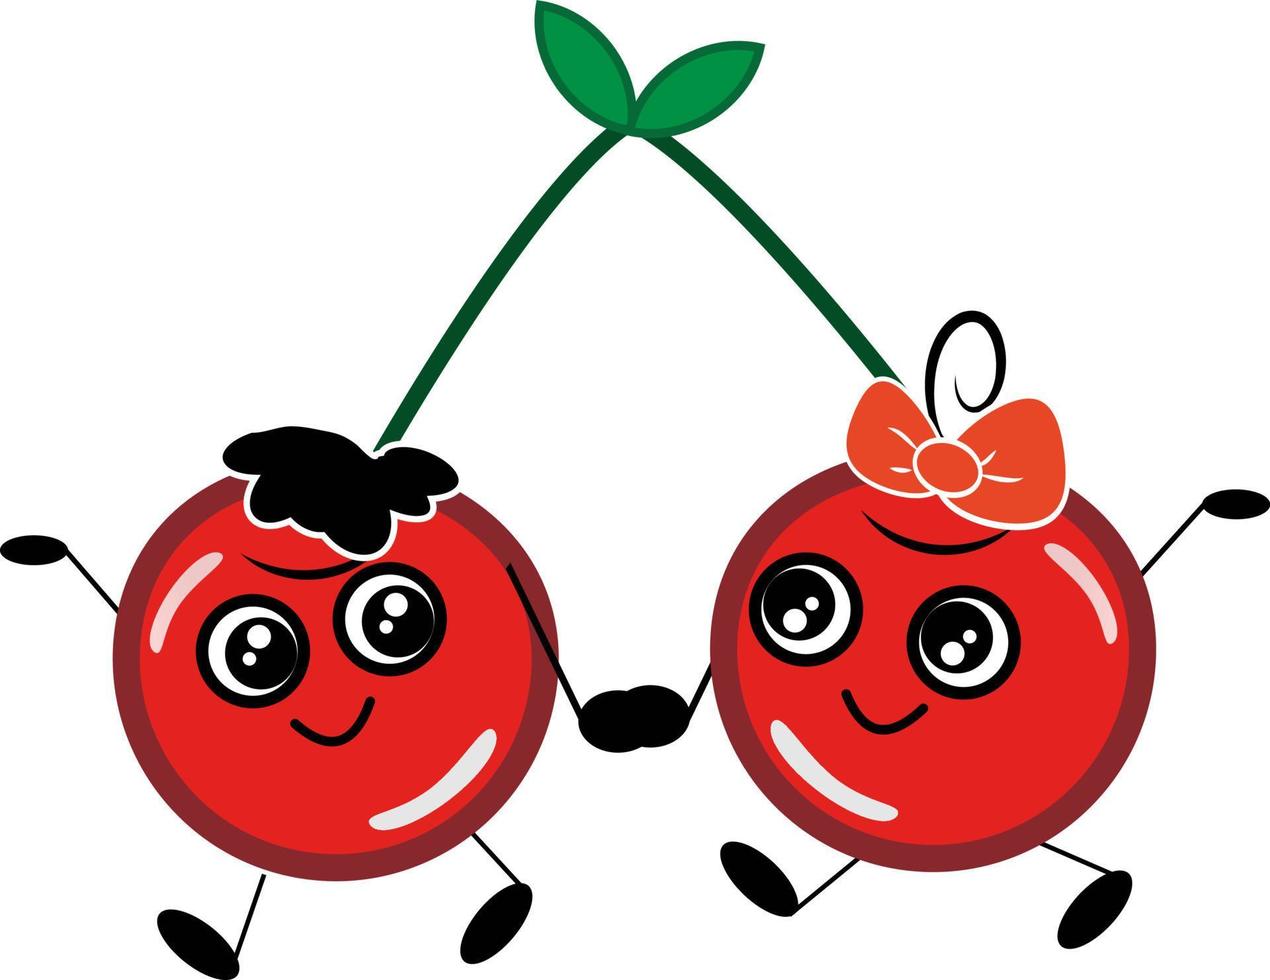 Cherries runing together, illustration, vector on a white background.